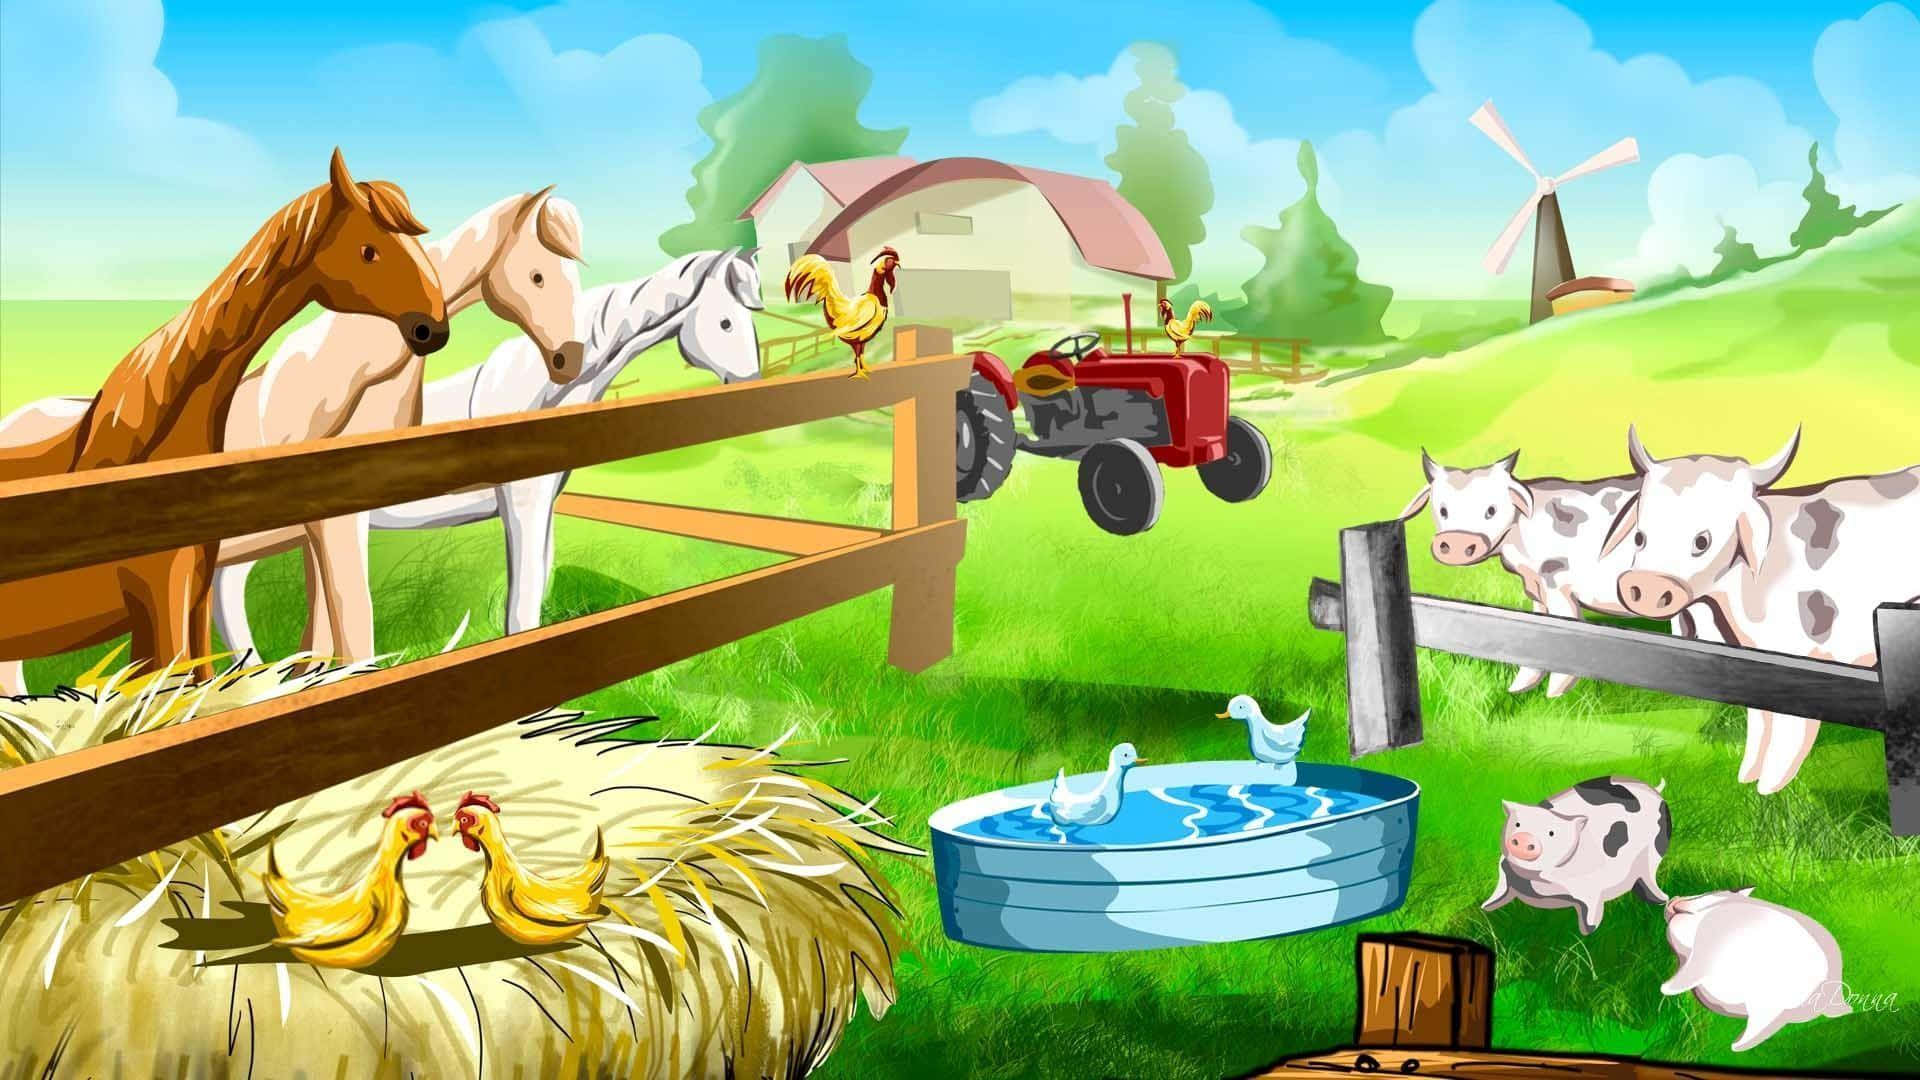 A group of happy farm animals in the green pasture